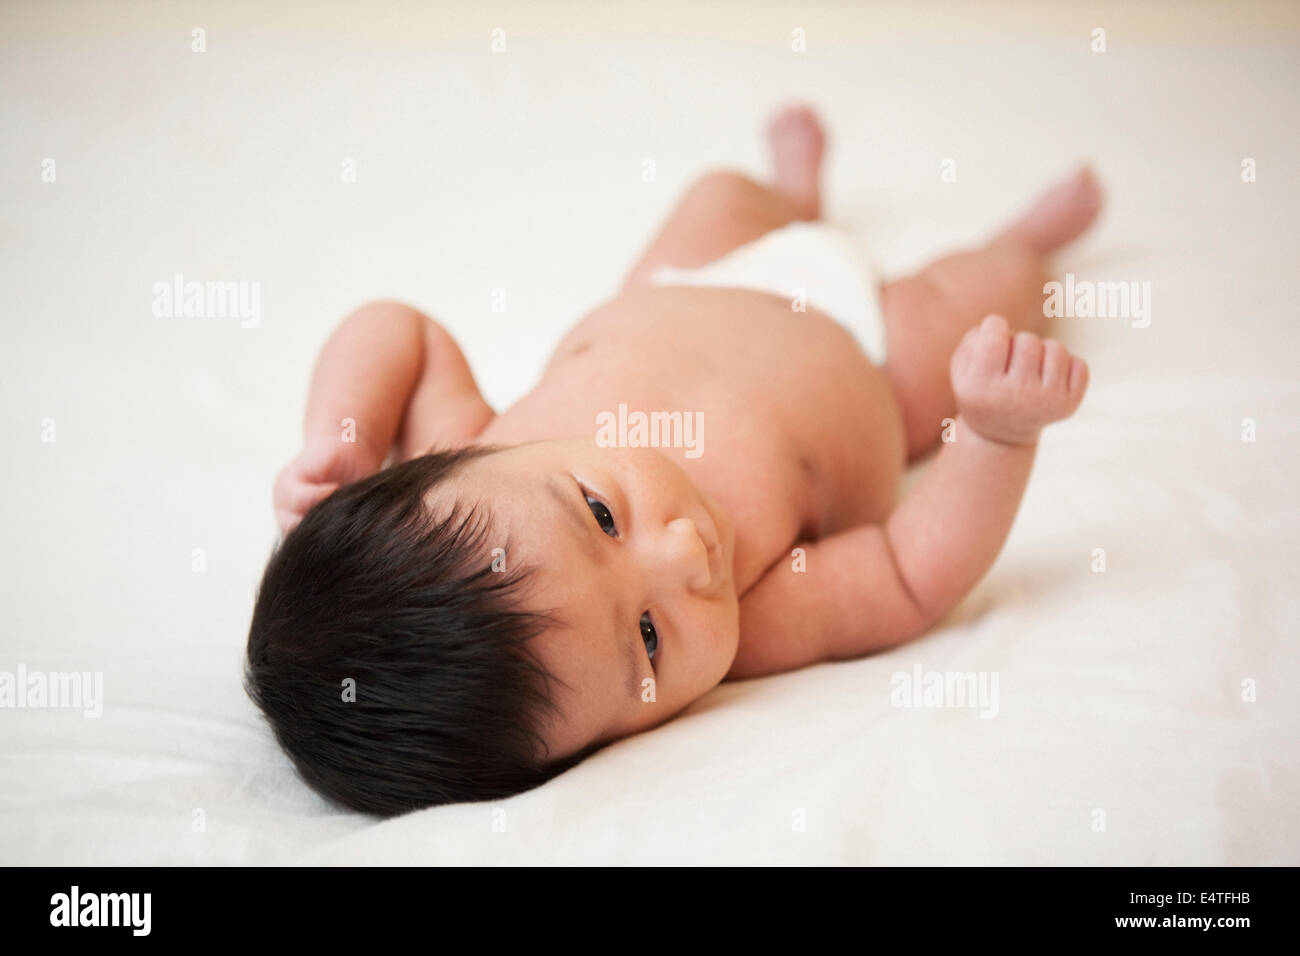 Newborn Asian baby in diaper lying on back, scratching head from baby acne, studio shot on white background Stock Photo